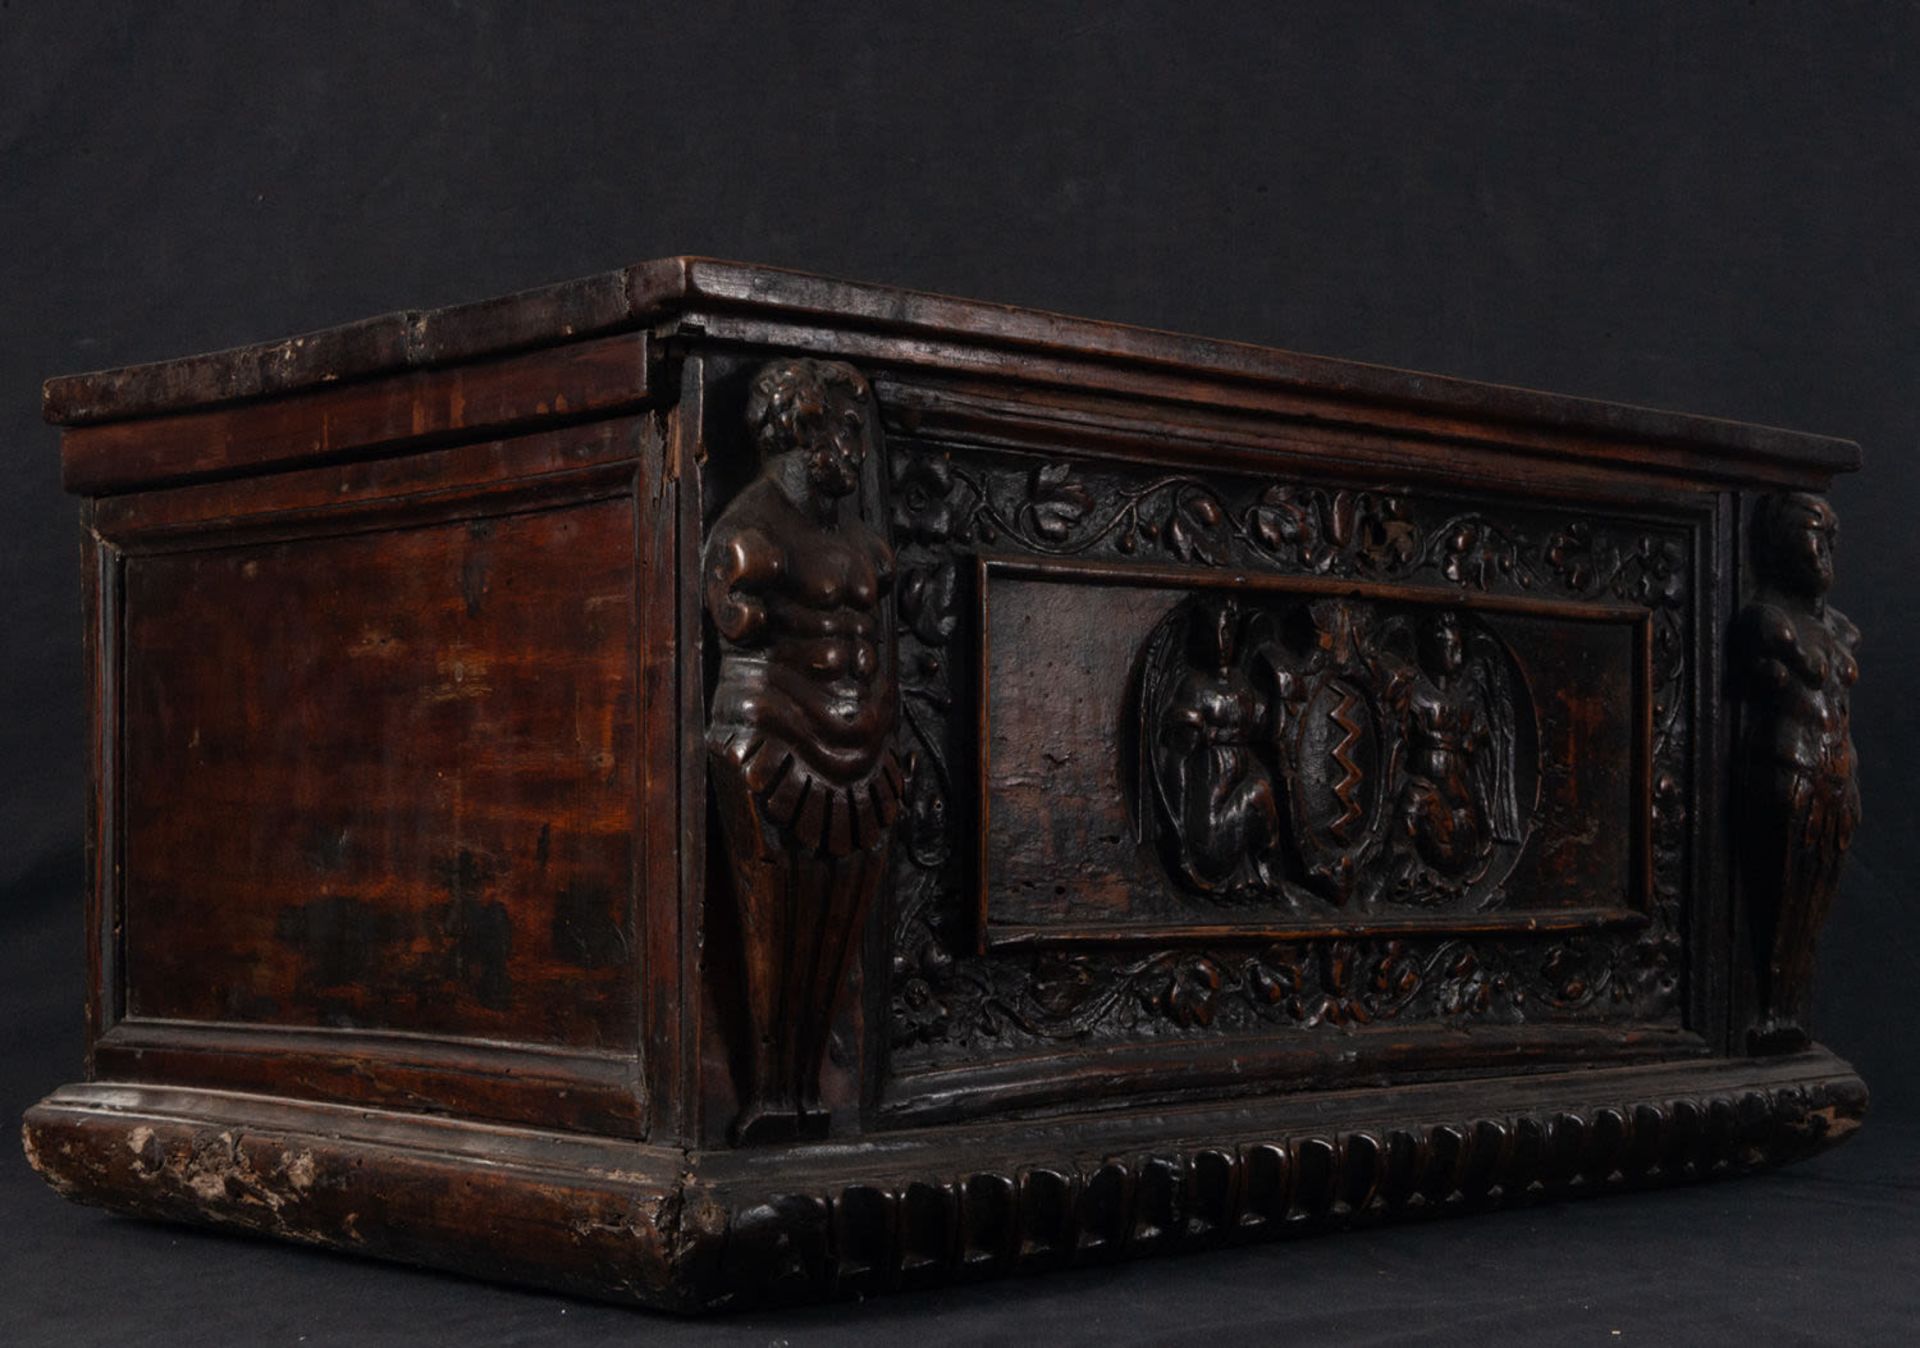 Large and Important Renaissance Chest, Spain or Italy, 16th century - Image 6 of 7